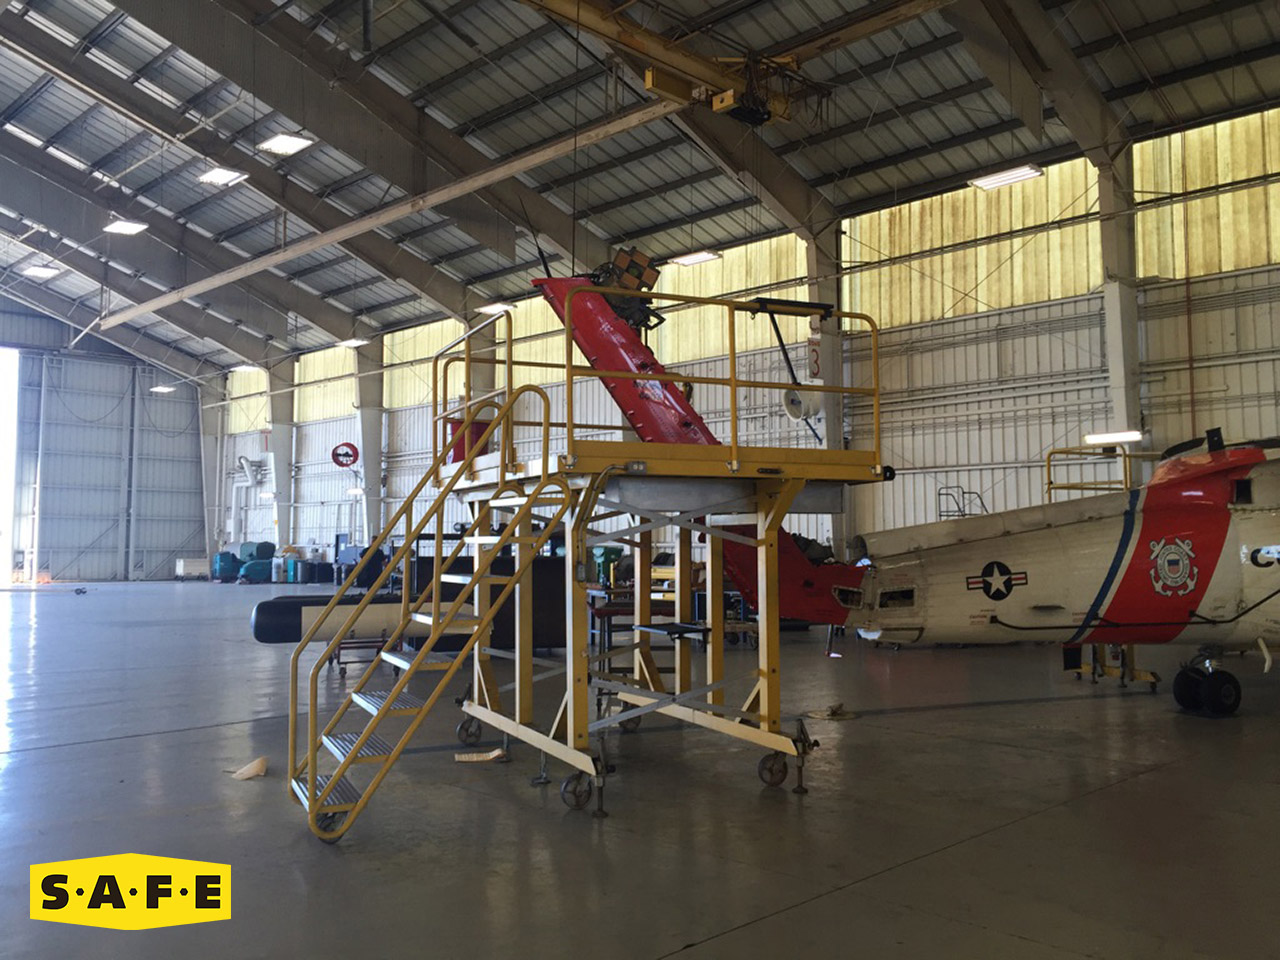 Sikorsky Rotor Wing Aircraft Maintenance Platforms - SAFE Structure Designs1280 x 960